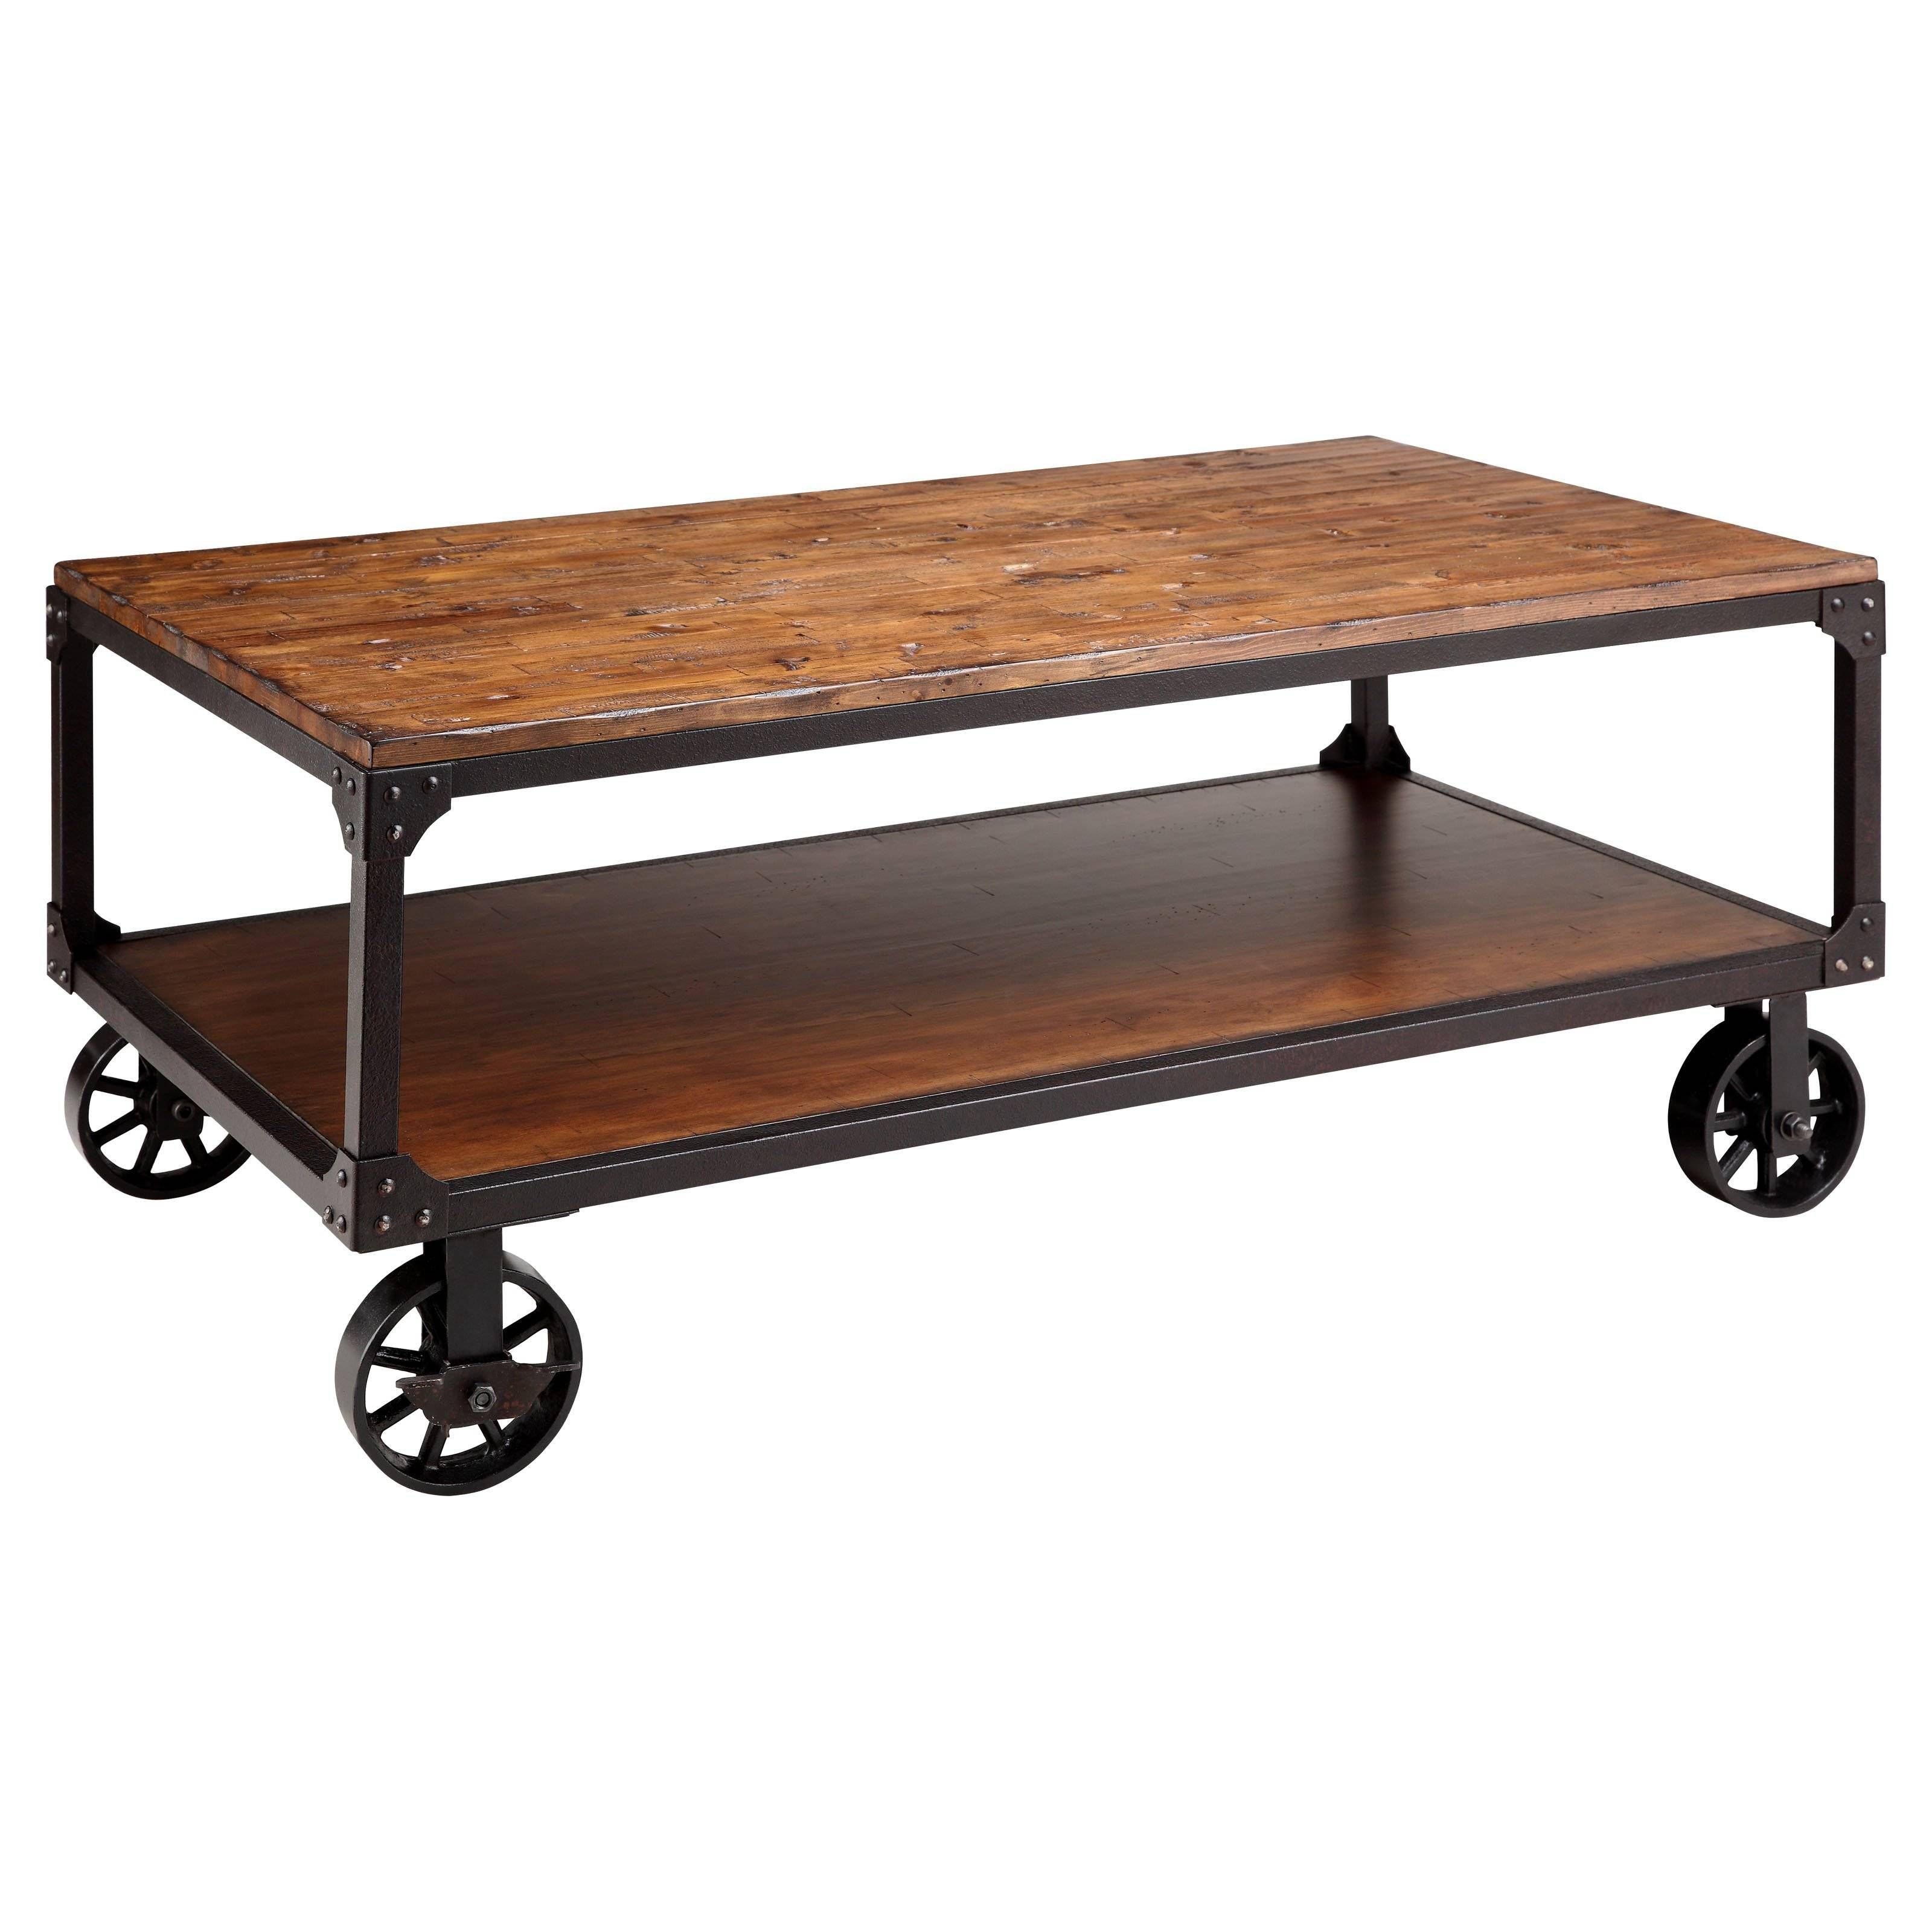 Wood And Metal Coffee Table On Wheels | Coffee Tables Decoration Inside Wheels Coffee Tables (View 28 of 30)